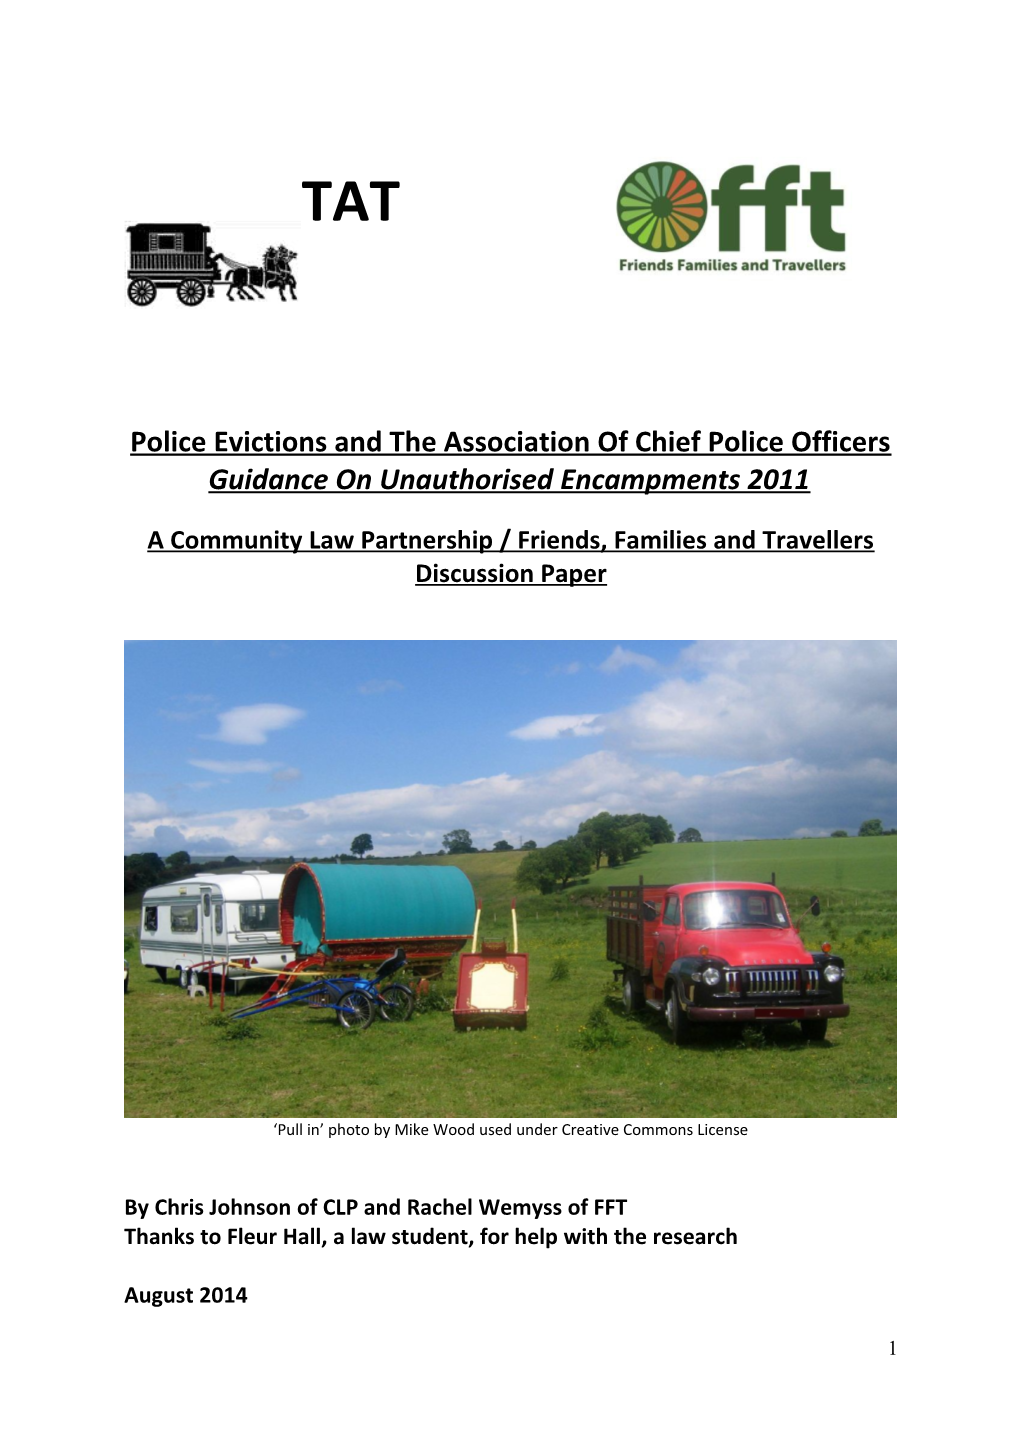 Police Evictions and the Association of Chief Police Officers Guidance on Unauthorised